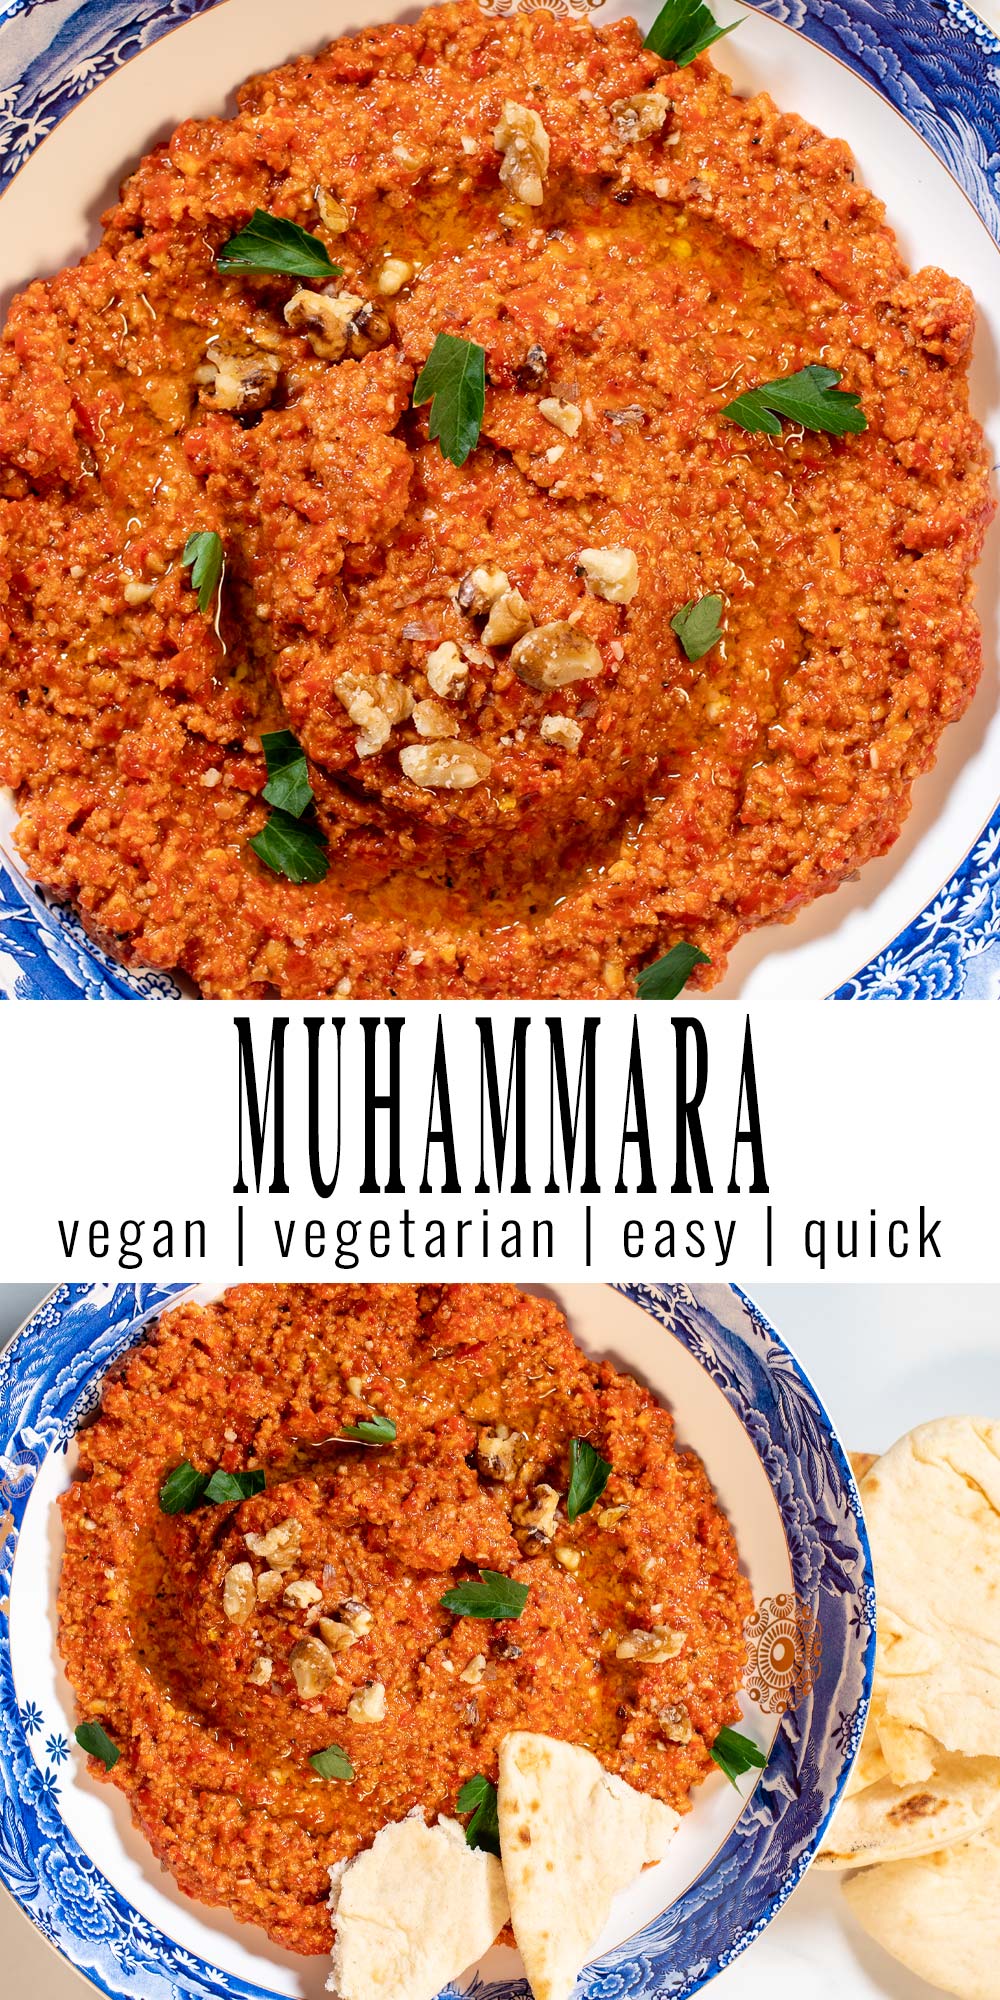 Collage of two photos of Muhammara with recipe title text.